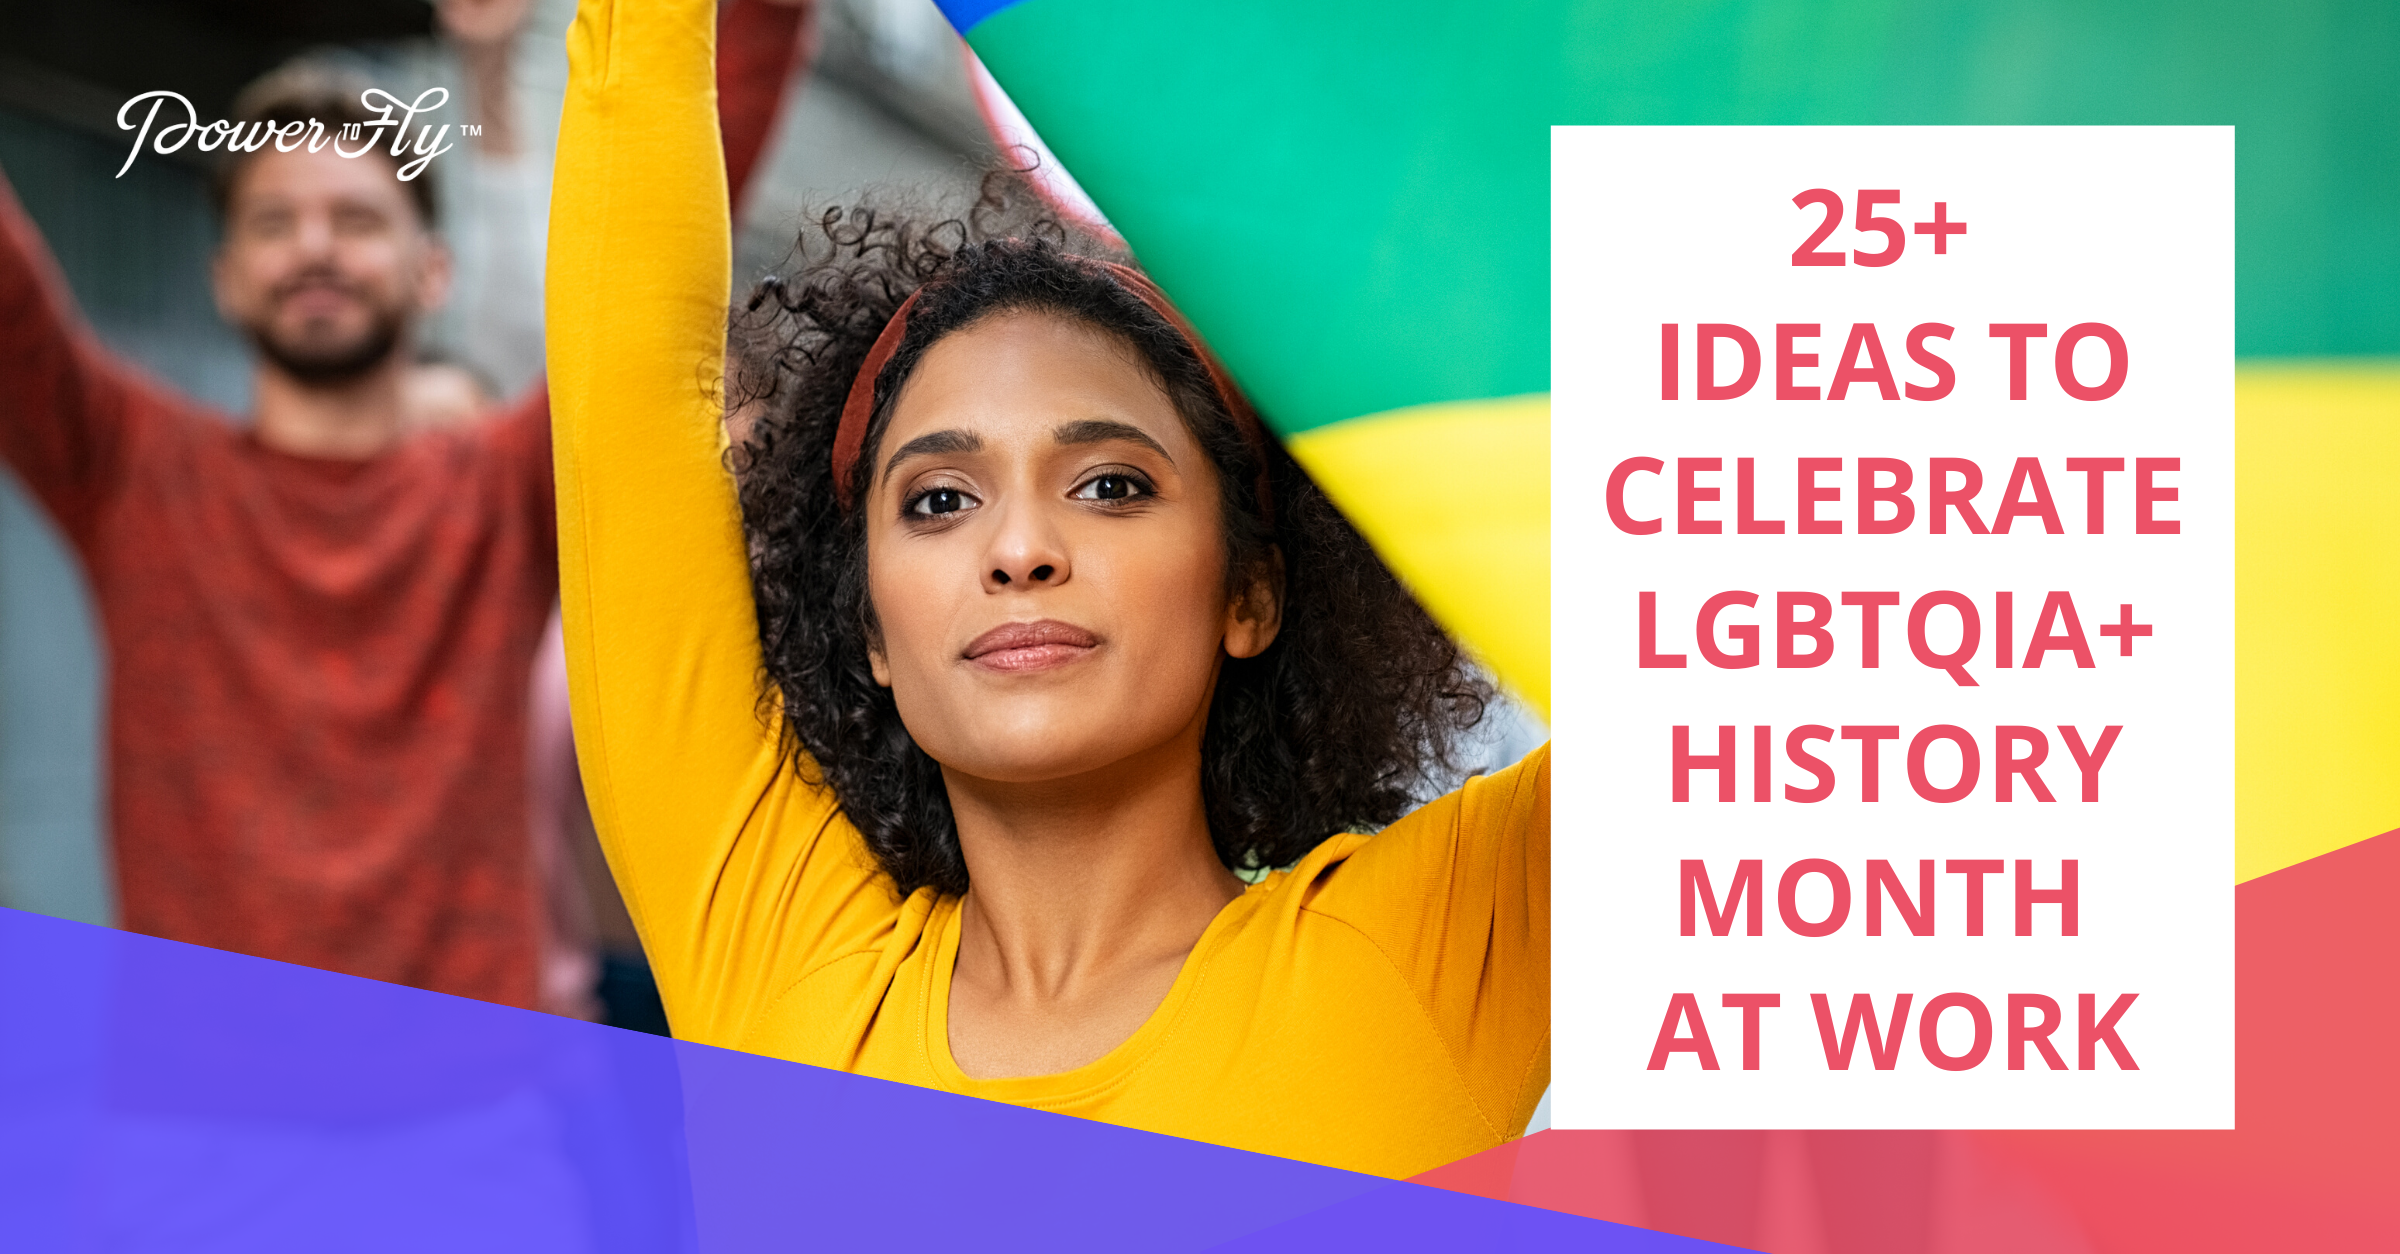 25+ Ideas to Celebrate LGBTQIA+ History Month at Work